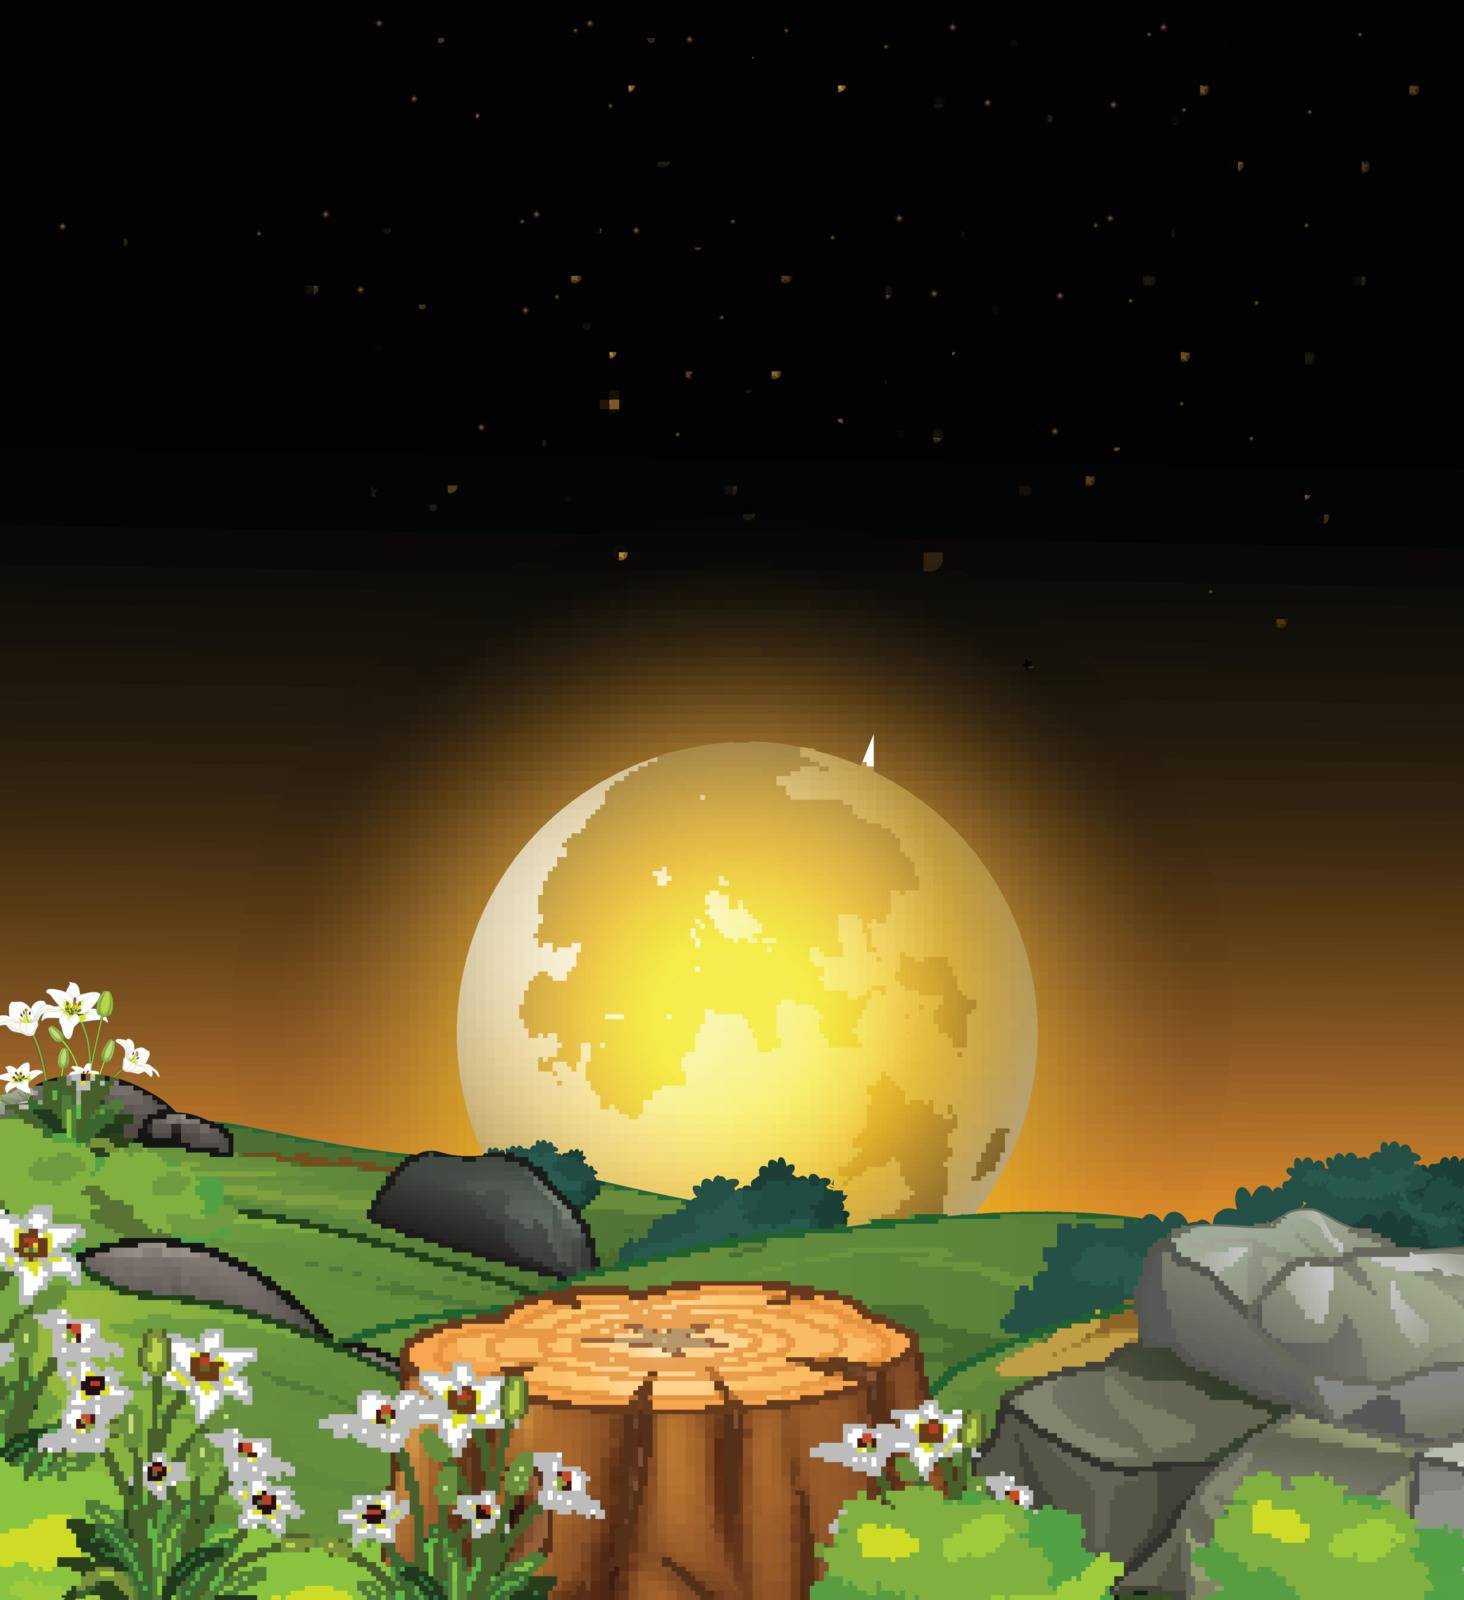 Landscape Grass Field Night View With Full Moonlight and White Ivy Flowers Cartoon